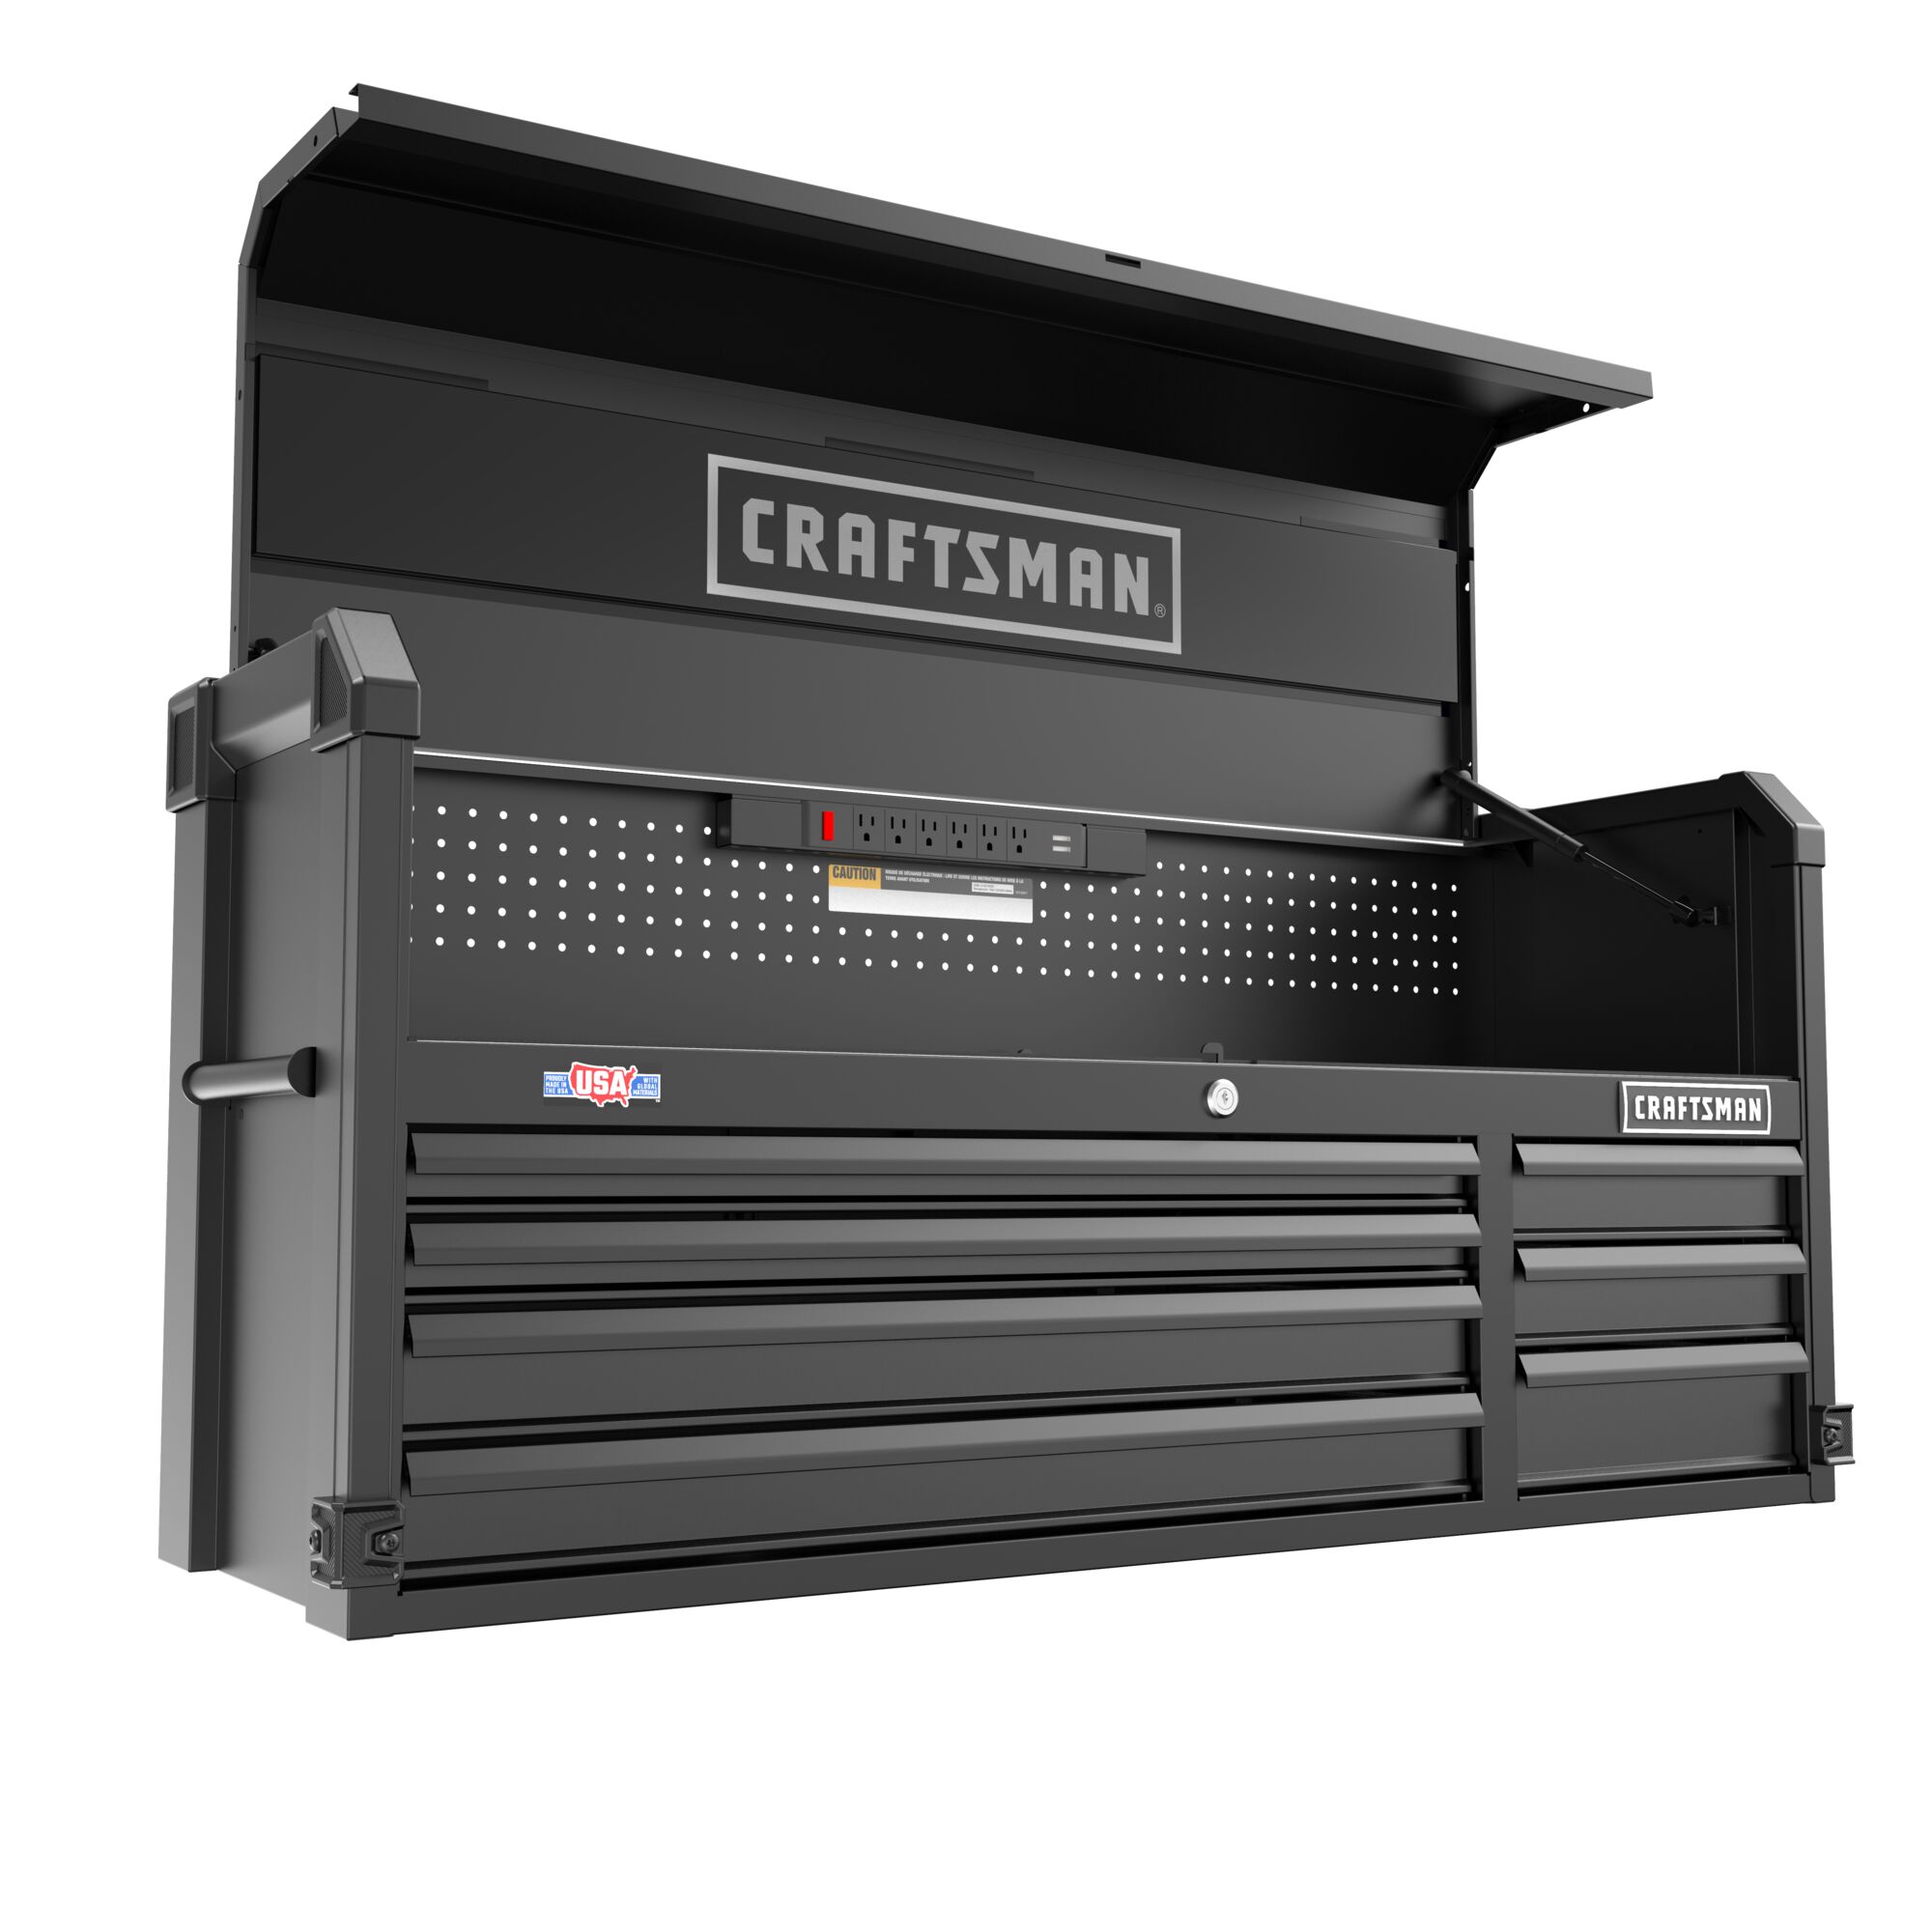 CRAFTSMAN Premium S2000 Series 52-inch Wide 7-Drawer Tool Chest with lid open, at 3/4 turn, looking up